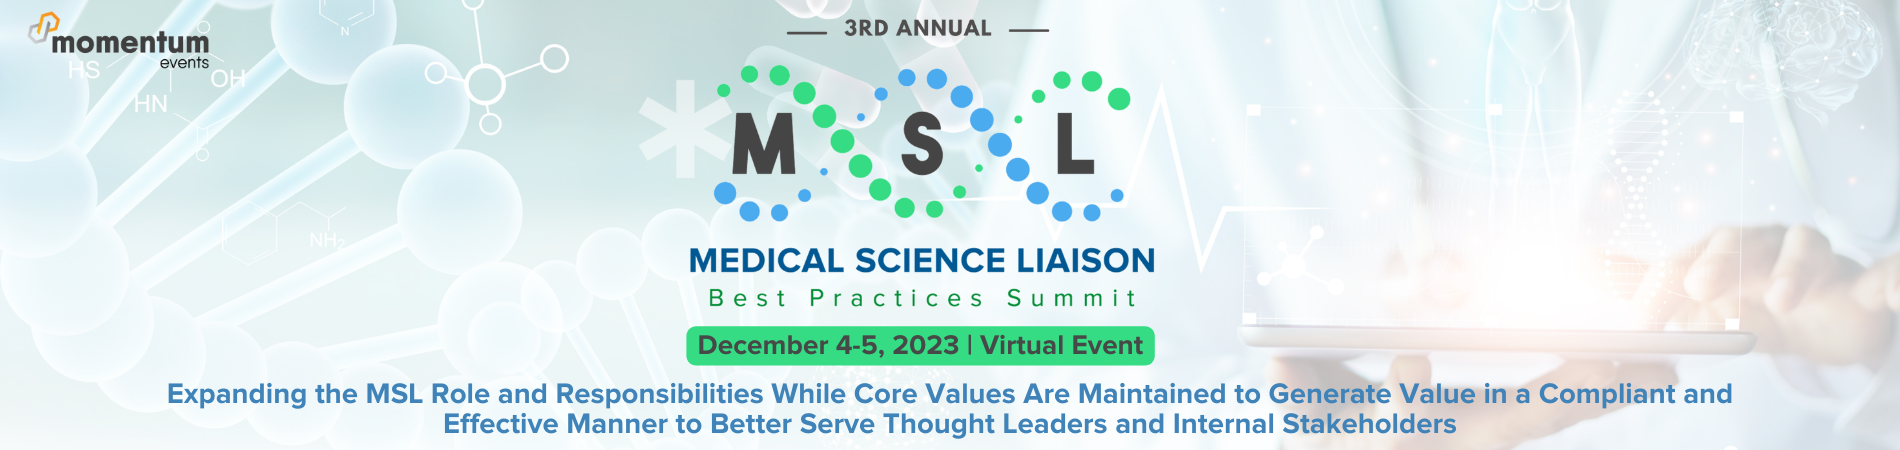 3rd Annual MSL Best Practices Summit, December 4-5, Virtual Event, Expanding the MSL Role and Responsibilities While Core Values Are Maintained to Generate Value in a Compliant and Effective Manner to Better Serve Thought Leaders and Internal Stakeholders